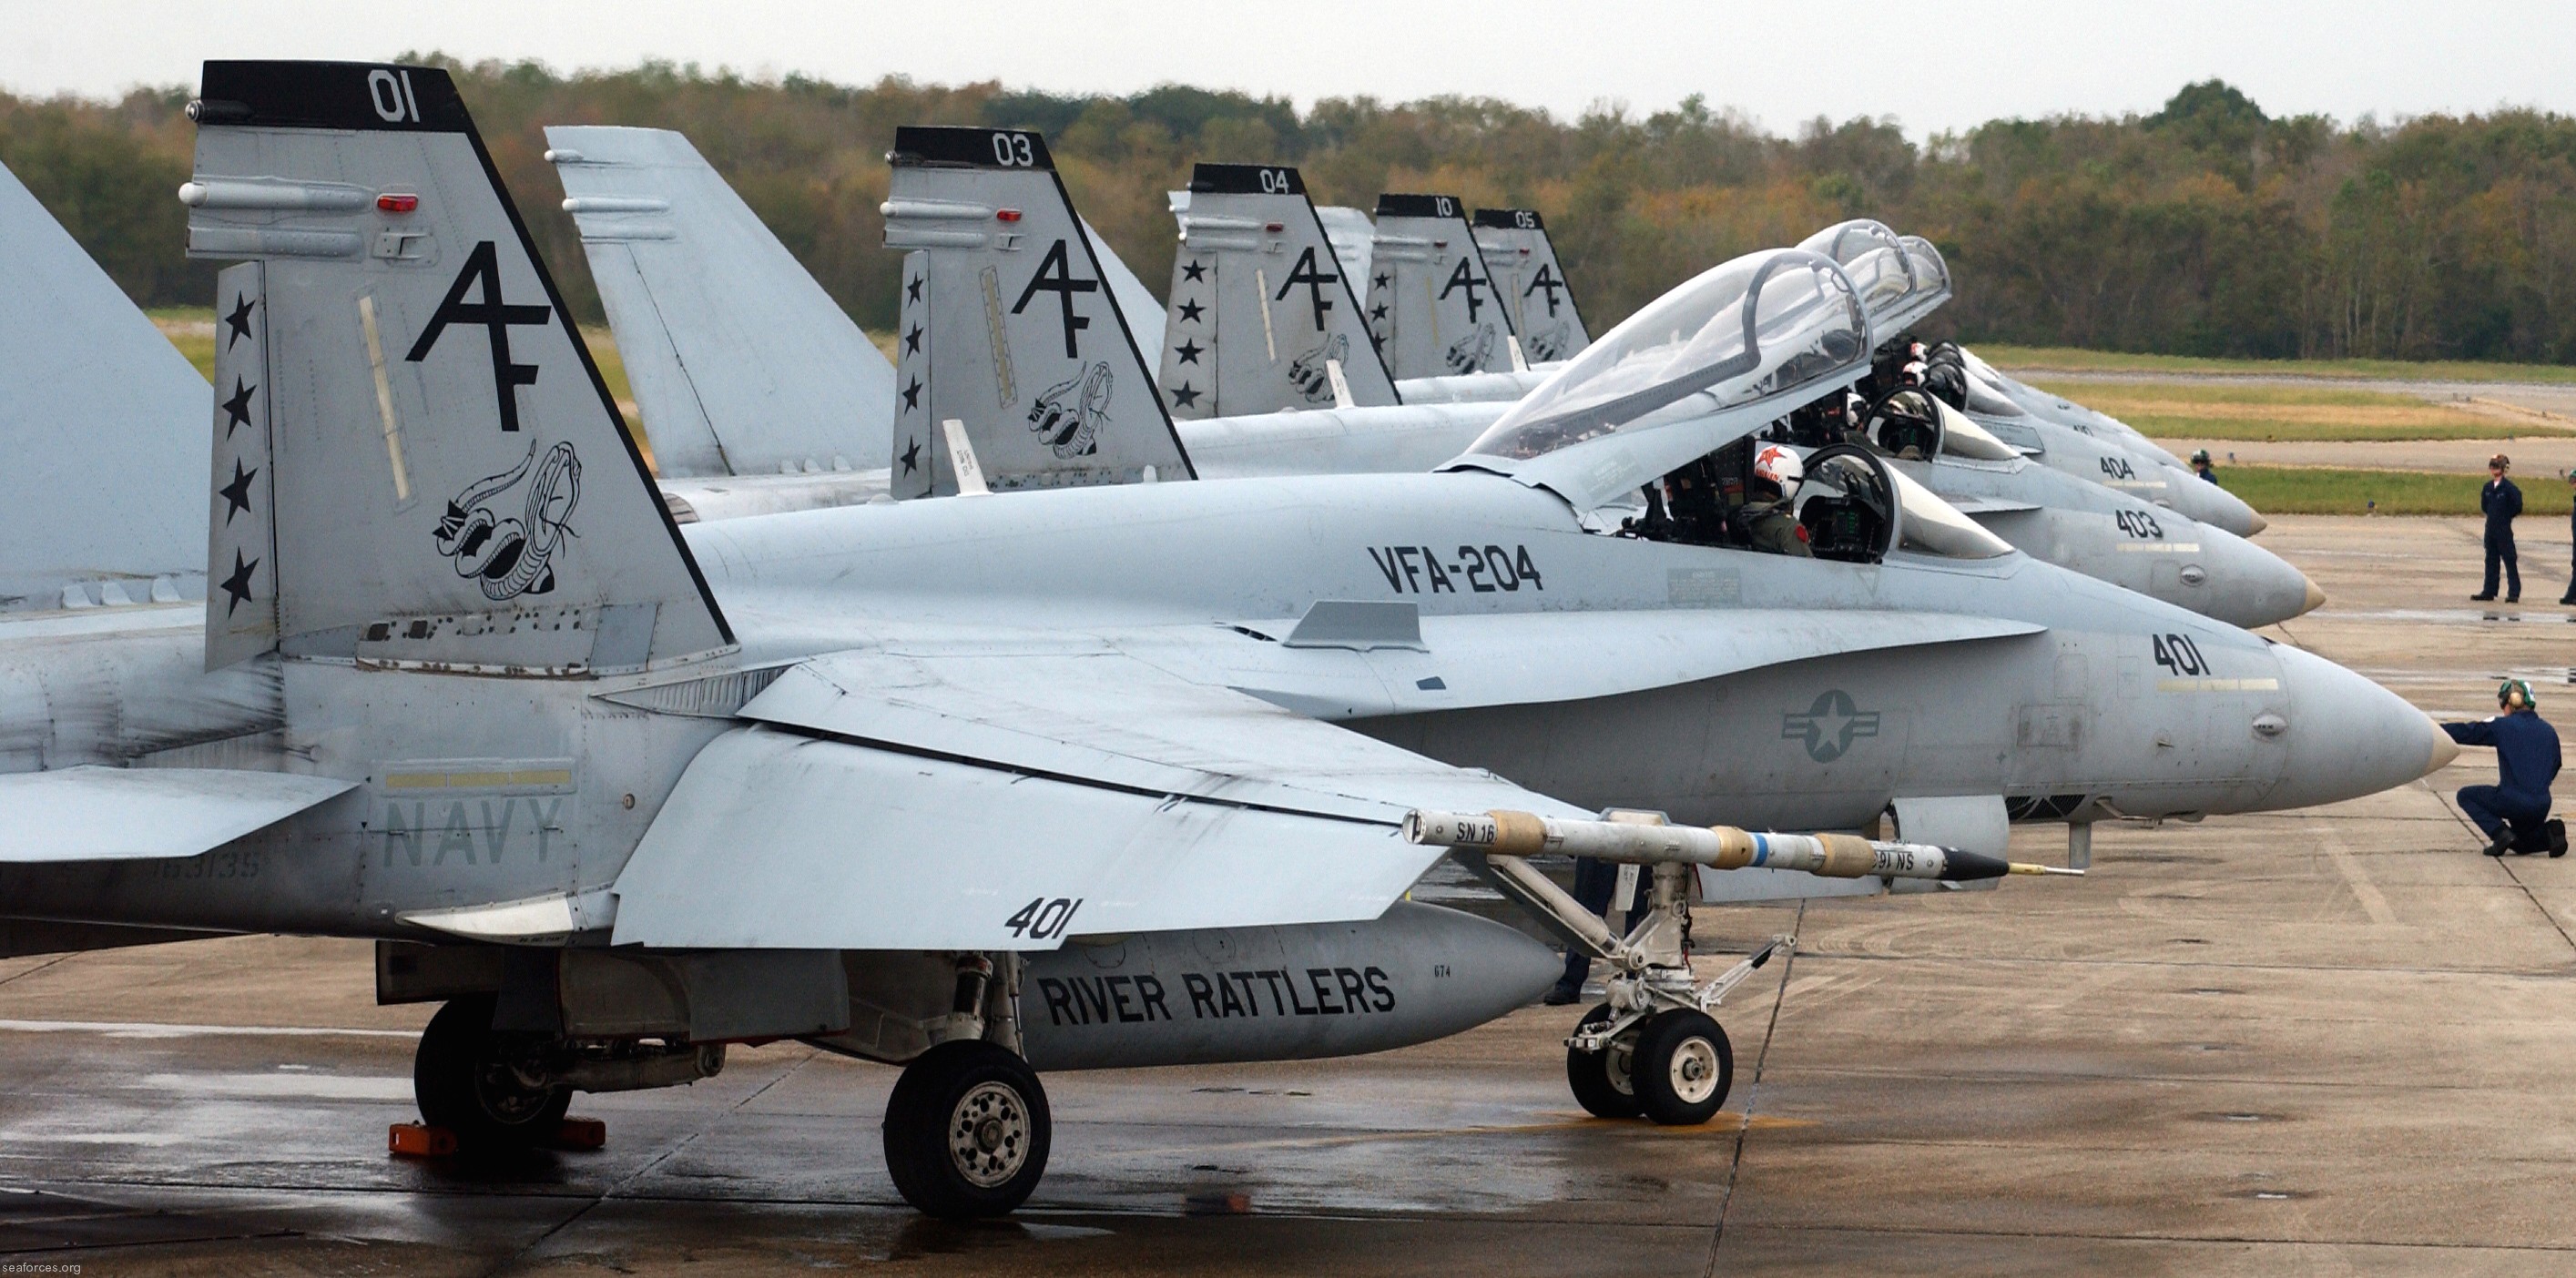 vfa-204 river rattlers f/a-18a+ hornet strike fighter squadron us navy reserve 10